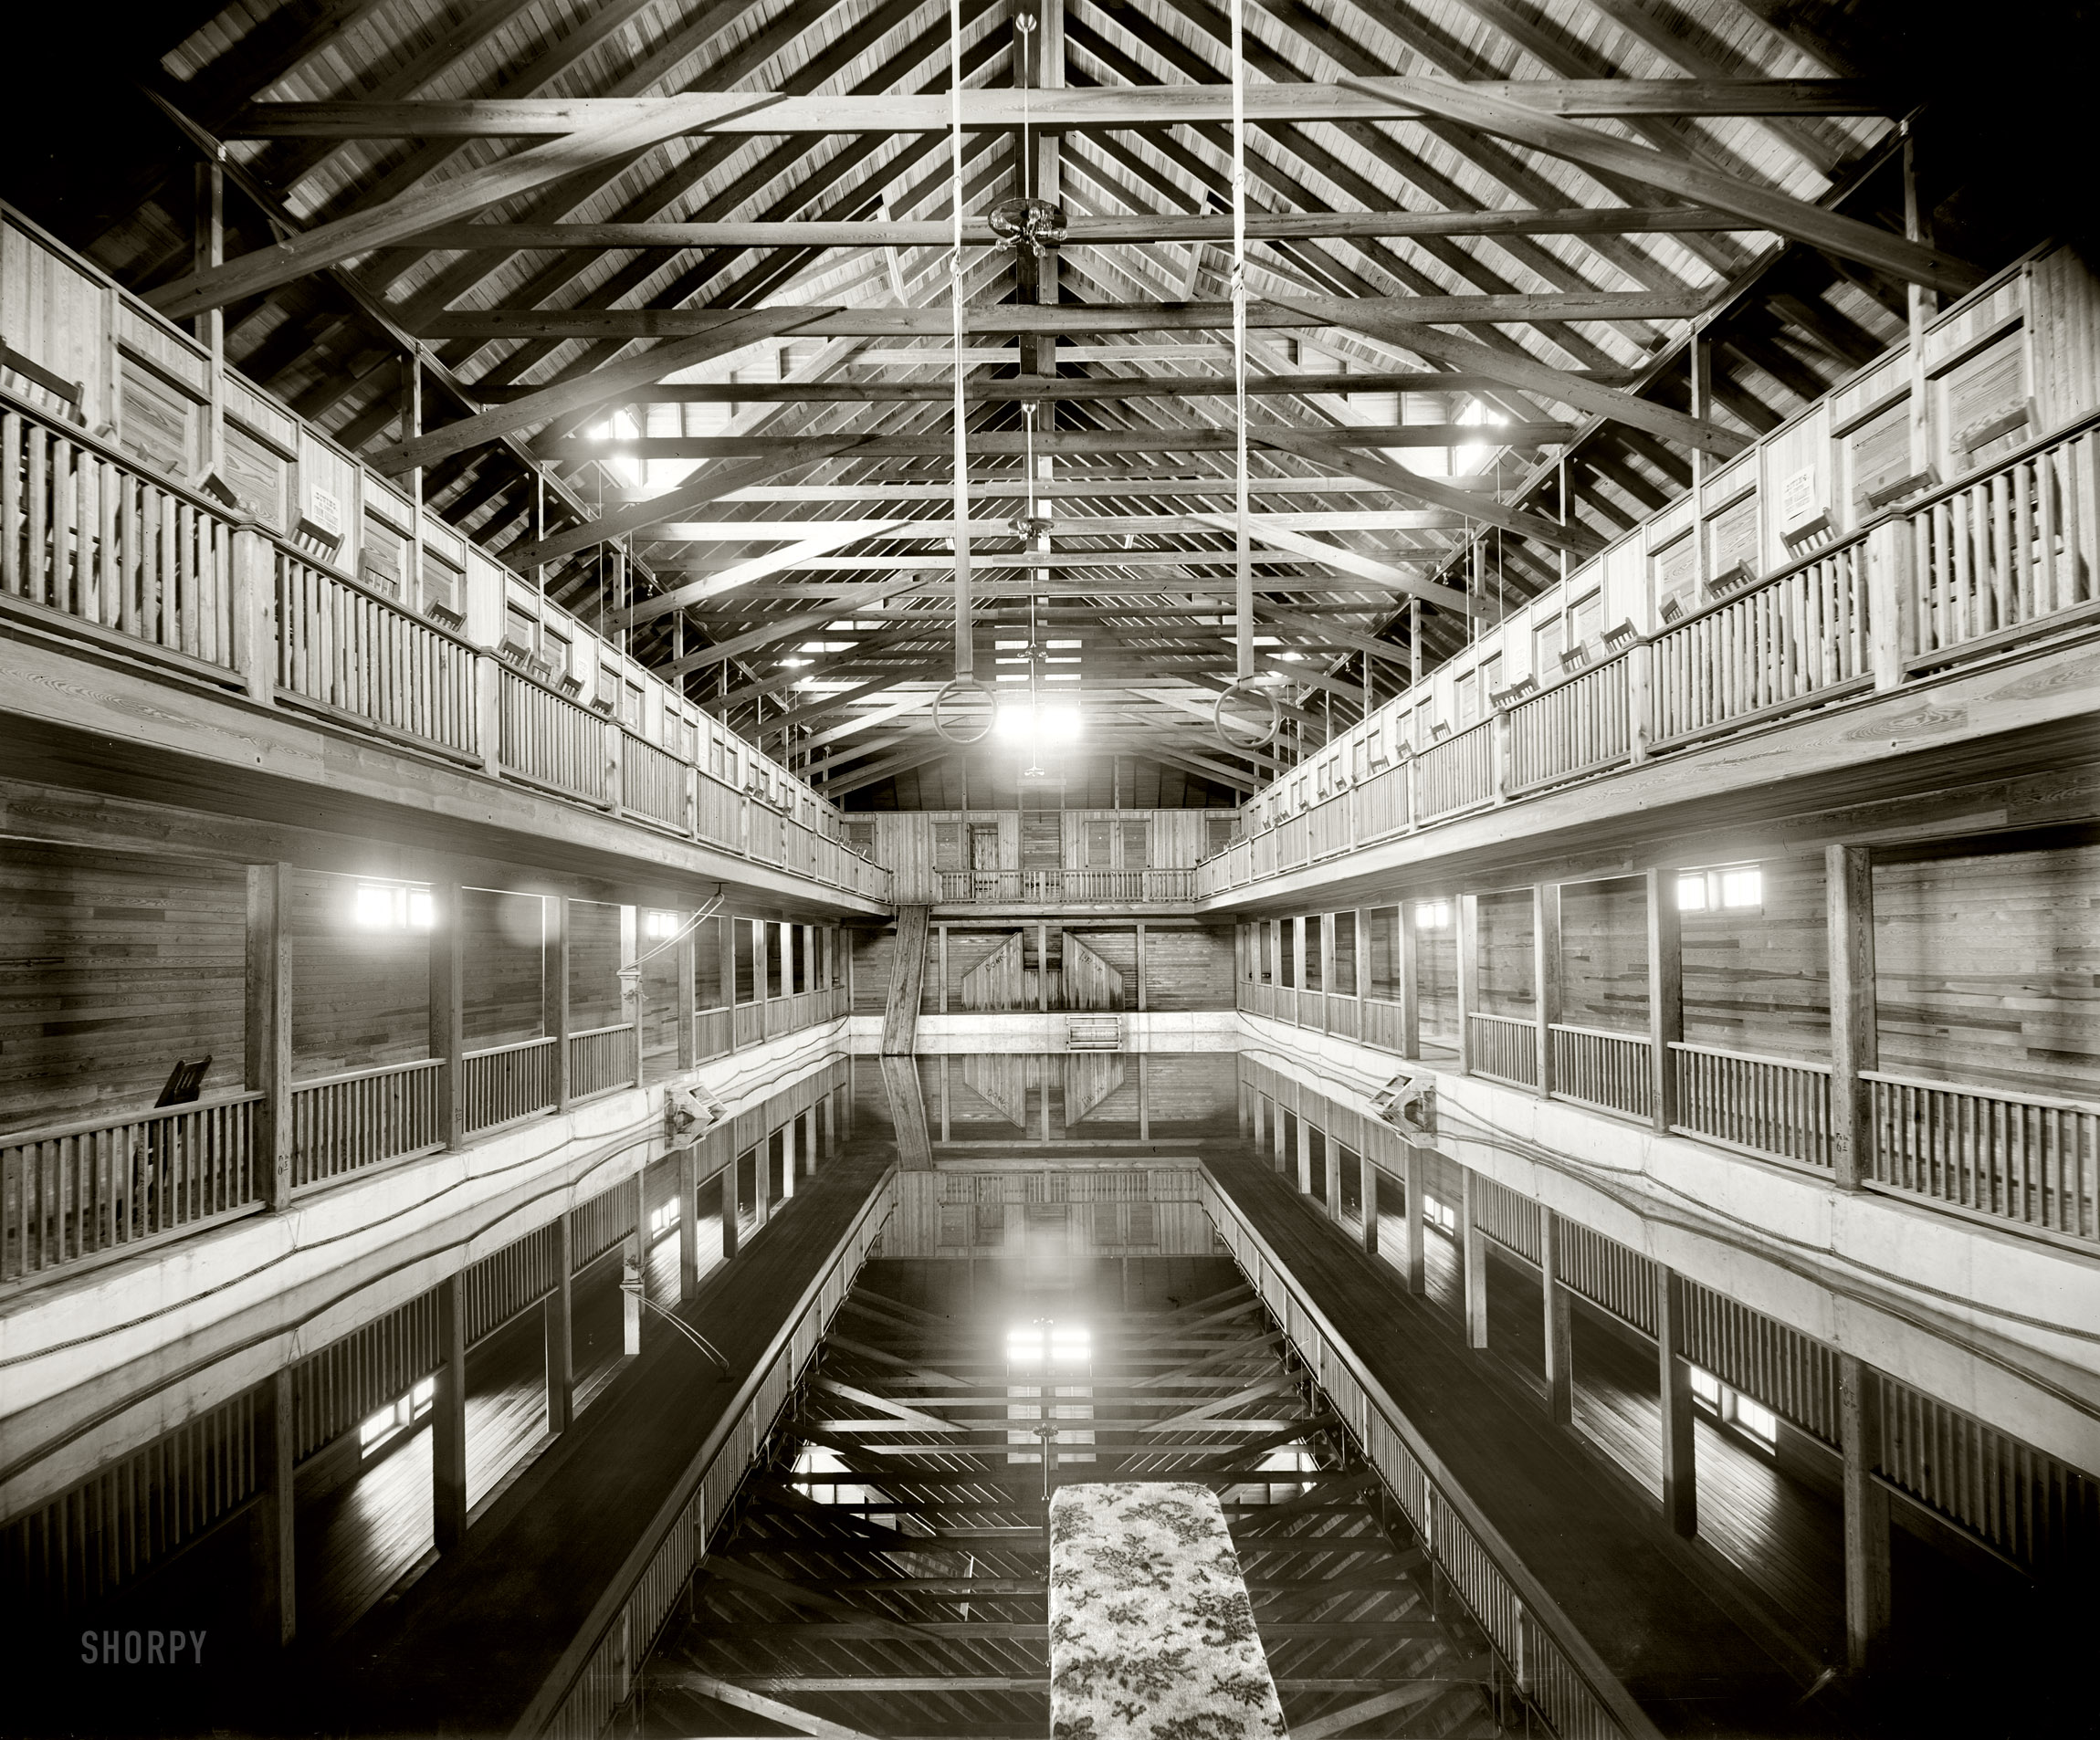 Charlevoix, Mich., circa 1900. "The pool, Charlevoix-the-Beautiful." Please, no diving from the gallery. 8x10 glass negative, Detroit Publishing. View full size.